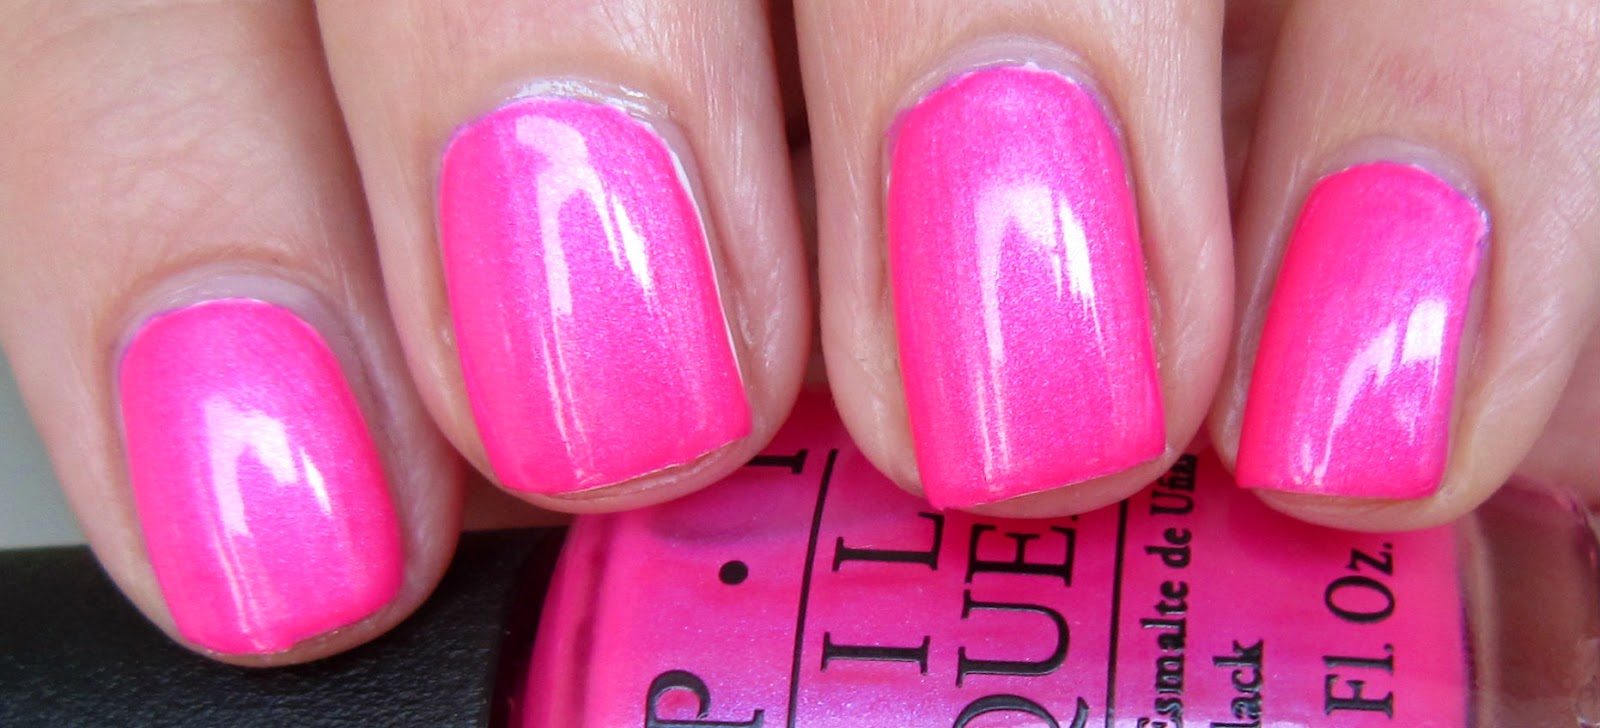 1. OPI Nail Lacquer in "Hotter Than You Pink" - wide 4